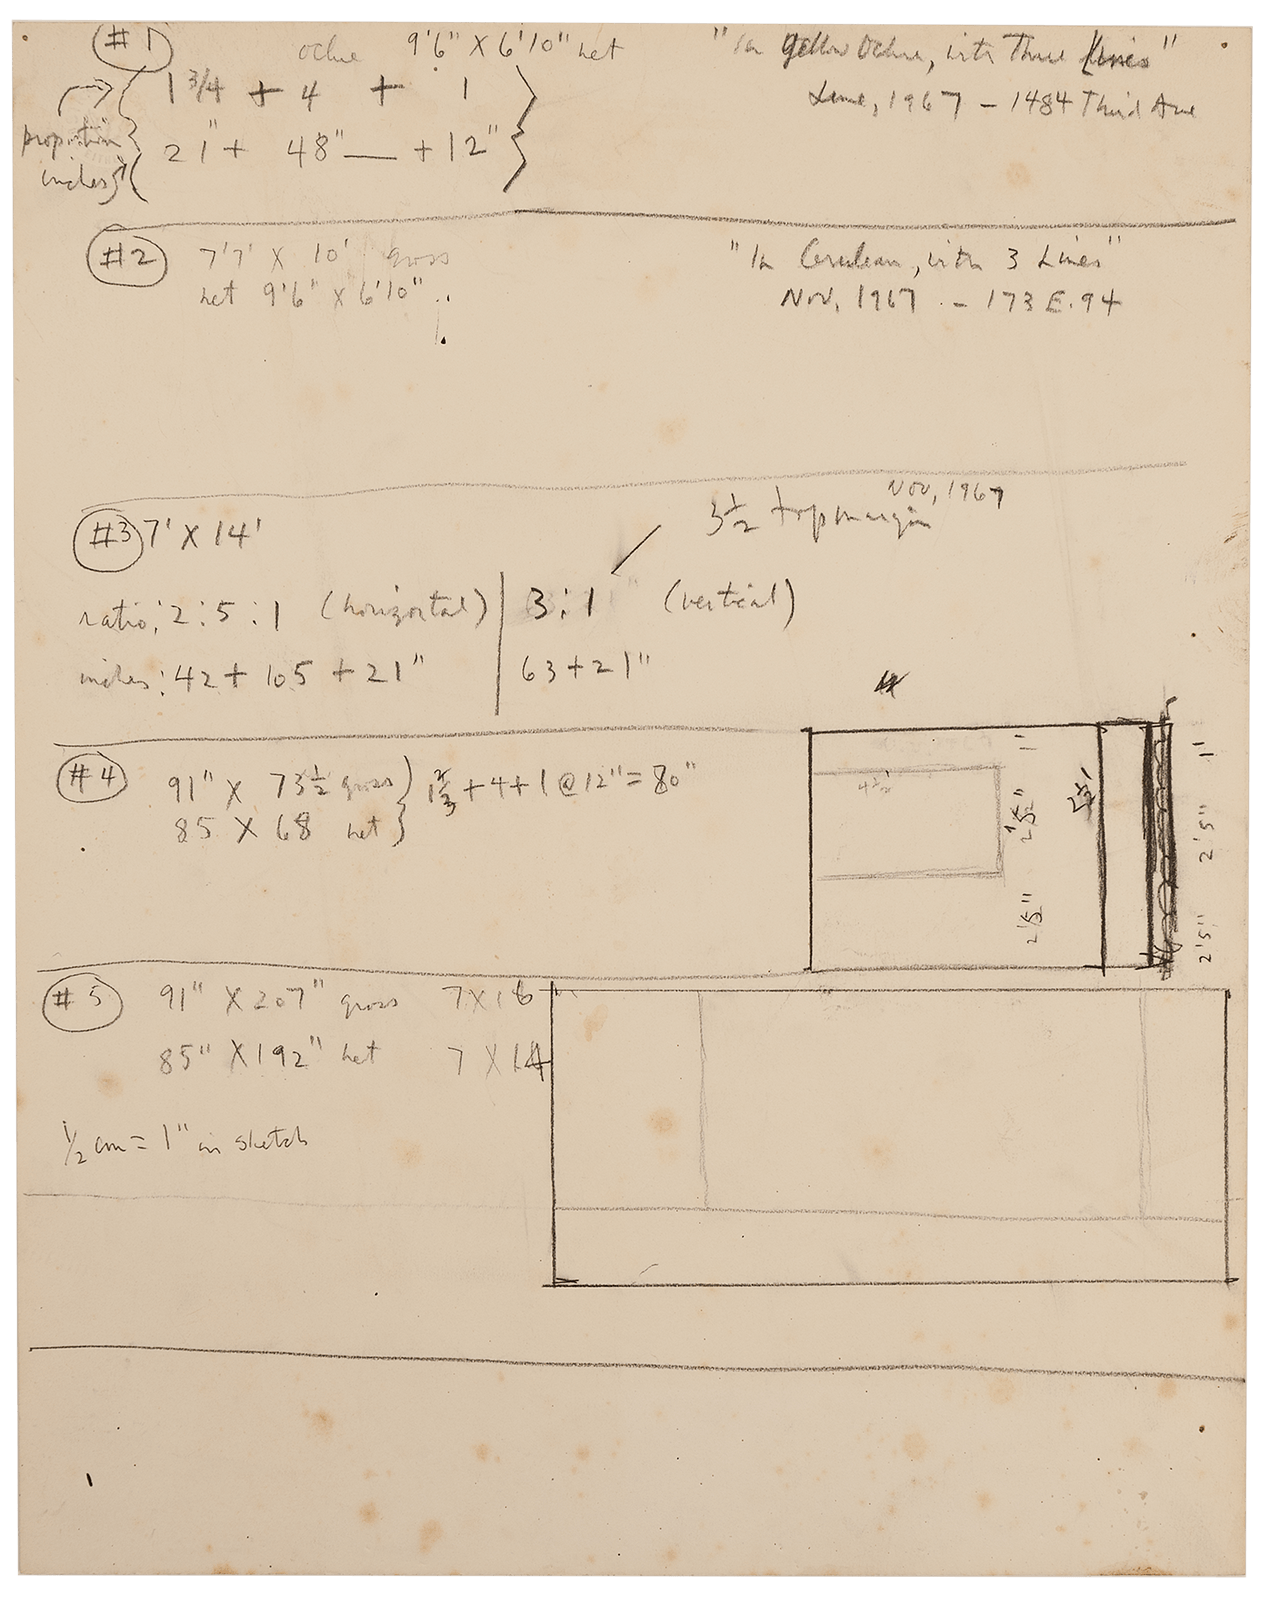 A paper with dimensions and sketches for proposed Open Series Paintings